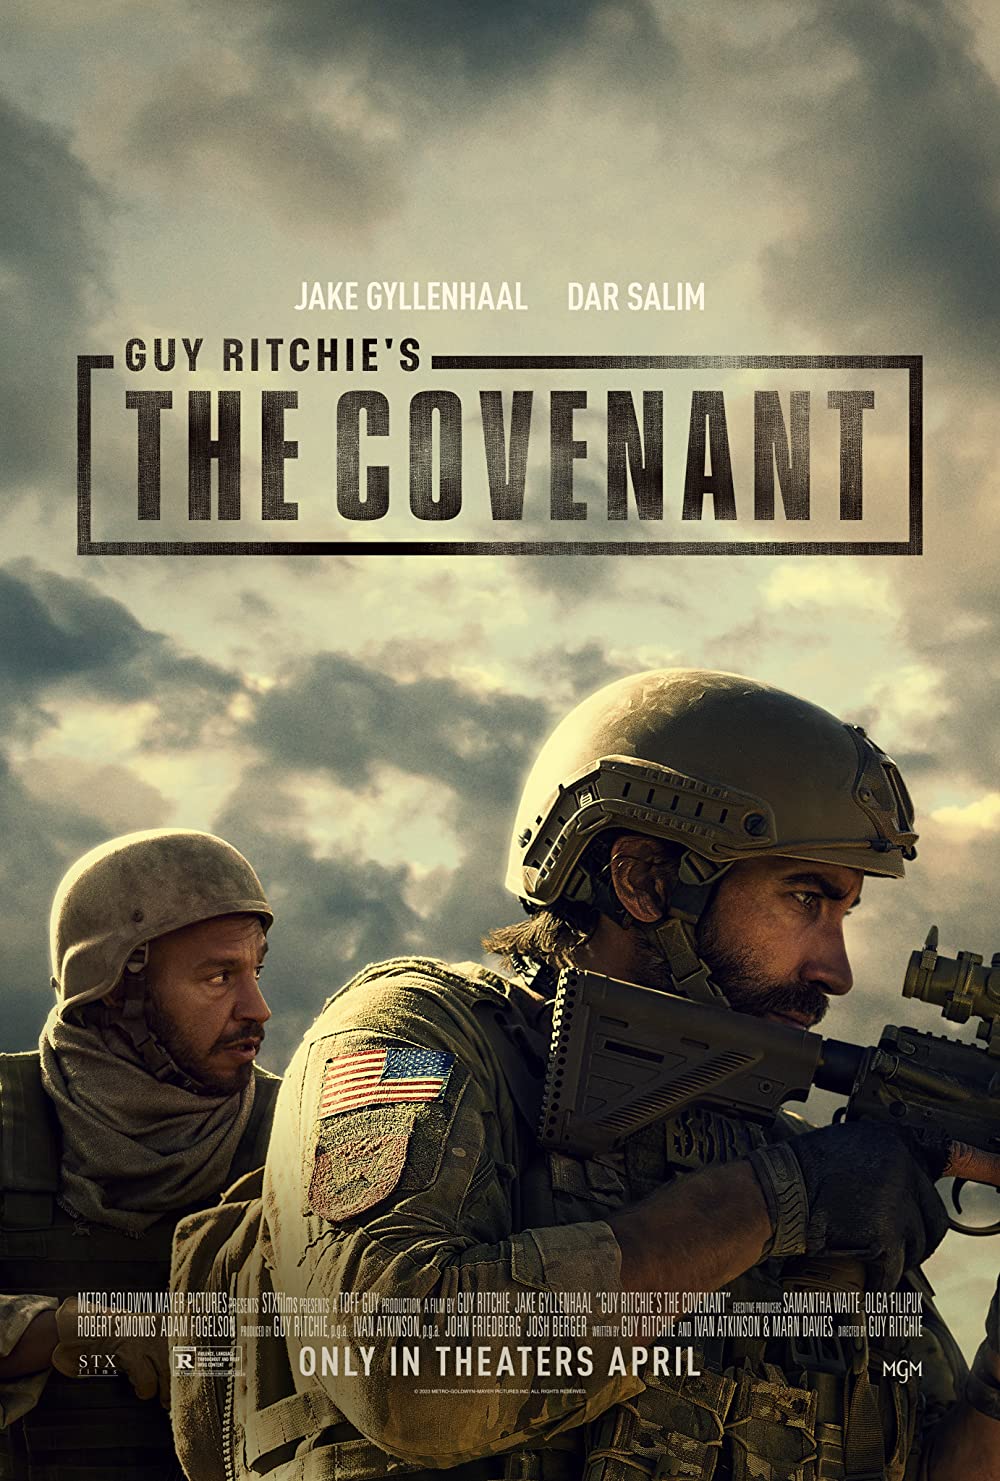 Cover Art for "Guy Ritchie's The Covenant"